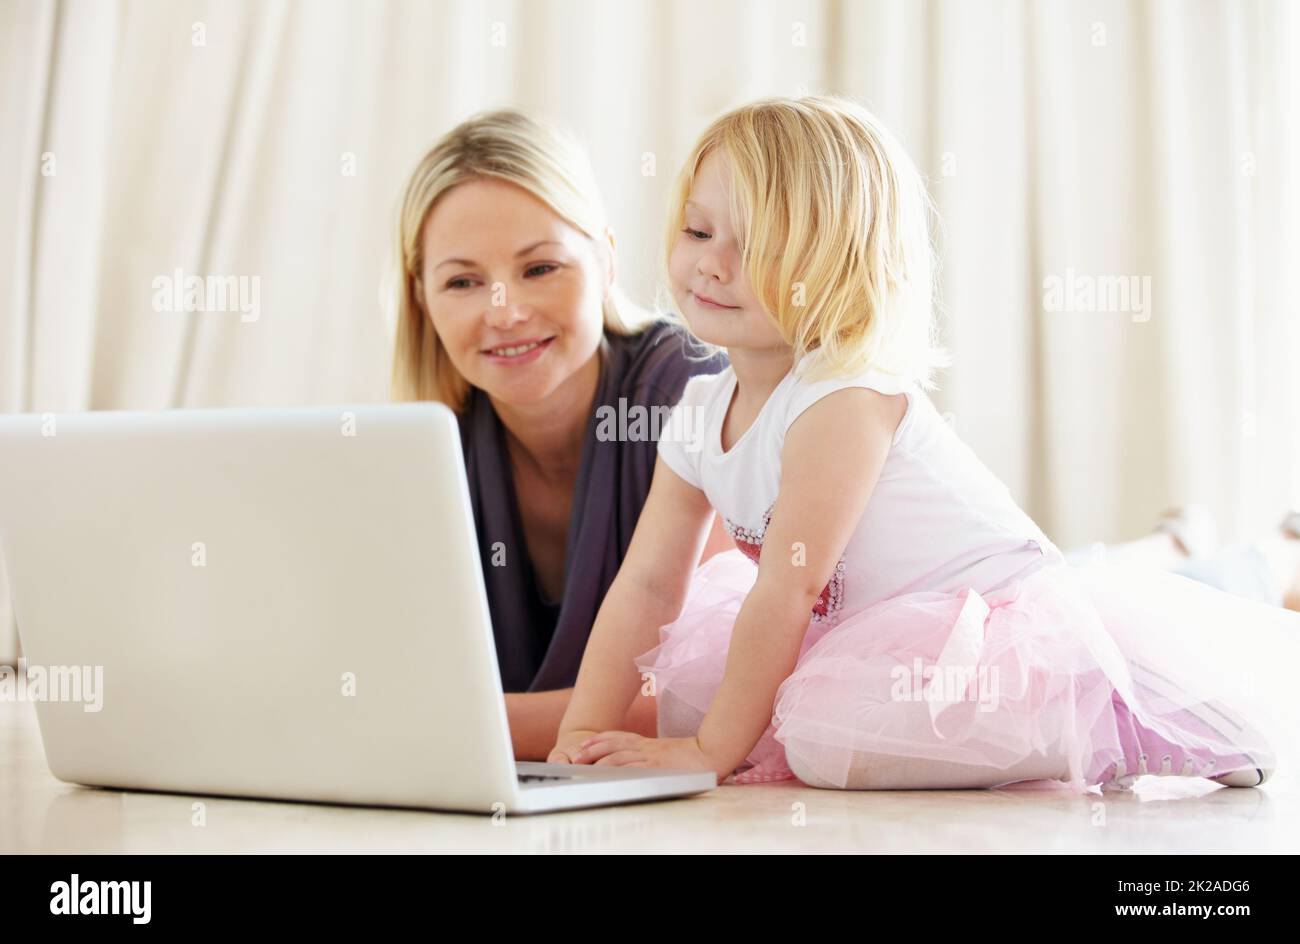 Shes pretty techno-savvy for such a young kid. Shot of a mother and daughter bonding while surfing the internet together. Stock Photo